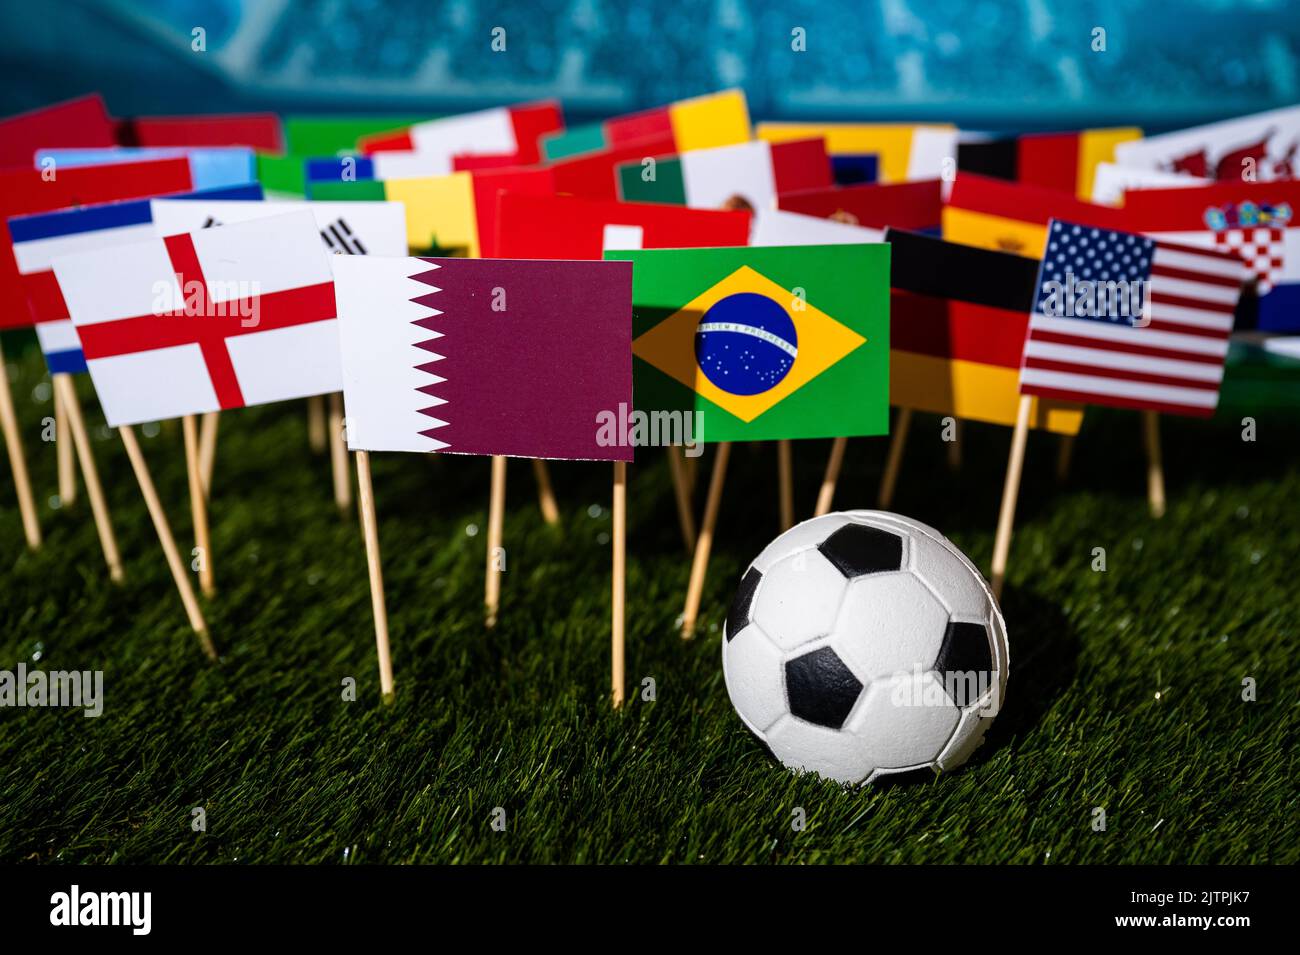 Soccer Wallpaper. Football Ball on green Grass and 32 Flags which will play in Qatar on December 2022 Stock Photo